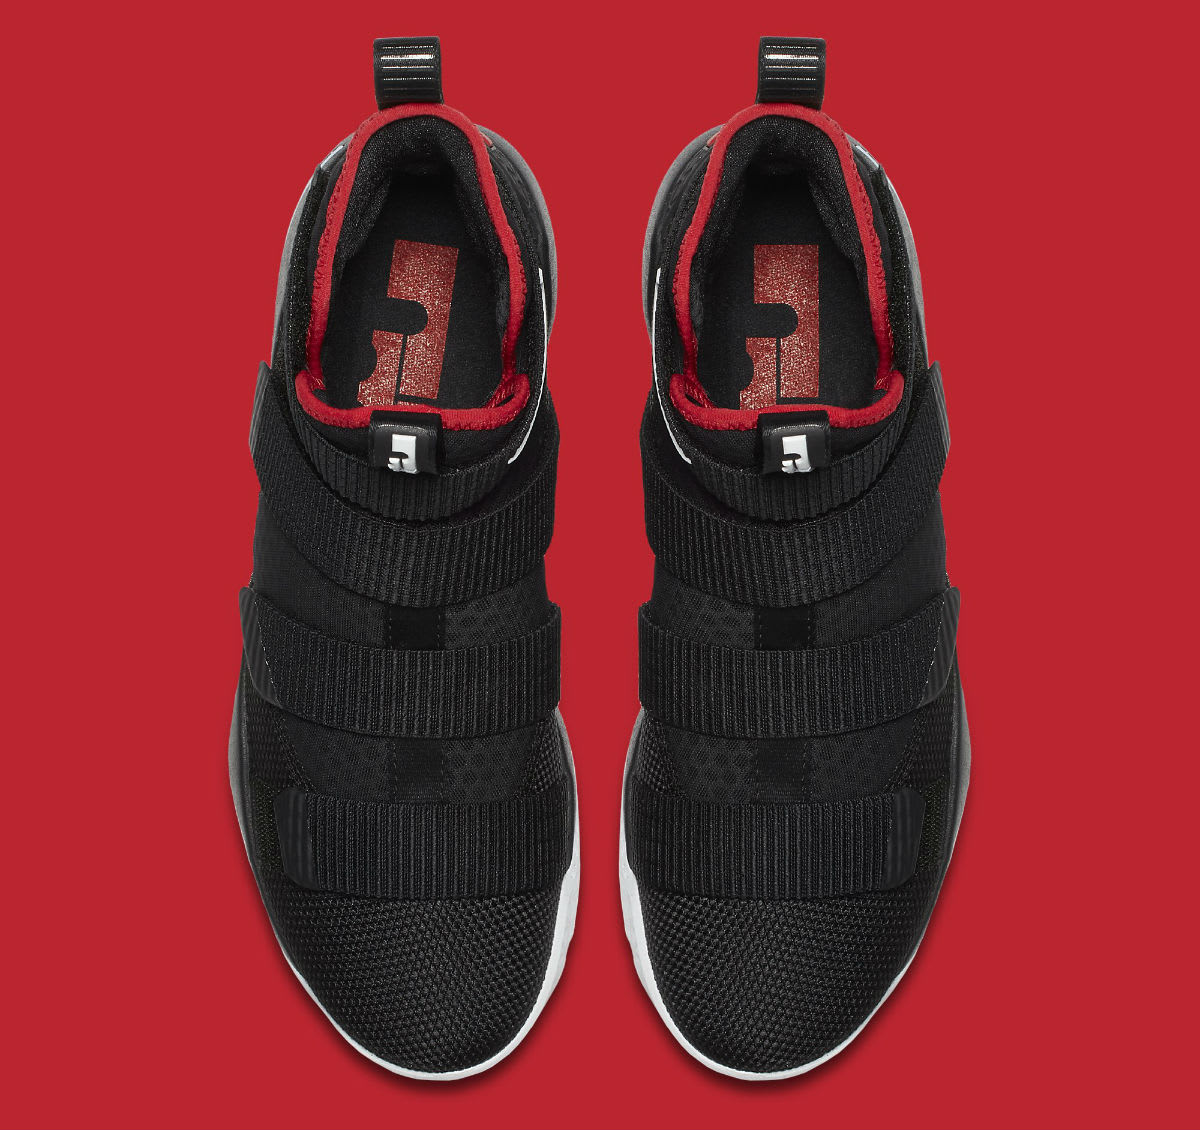 Nike LeBron Soldier 11 Bred Release Date Top 897644-002